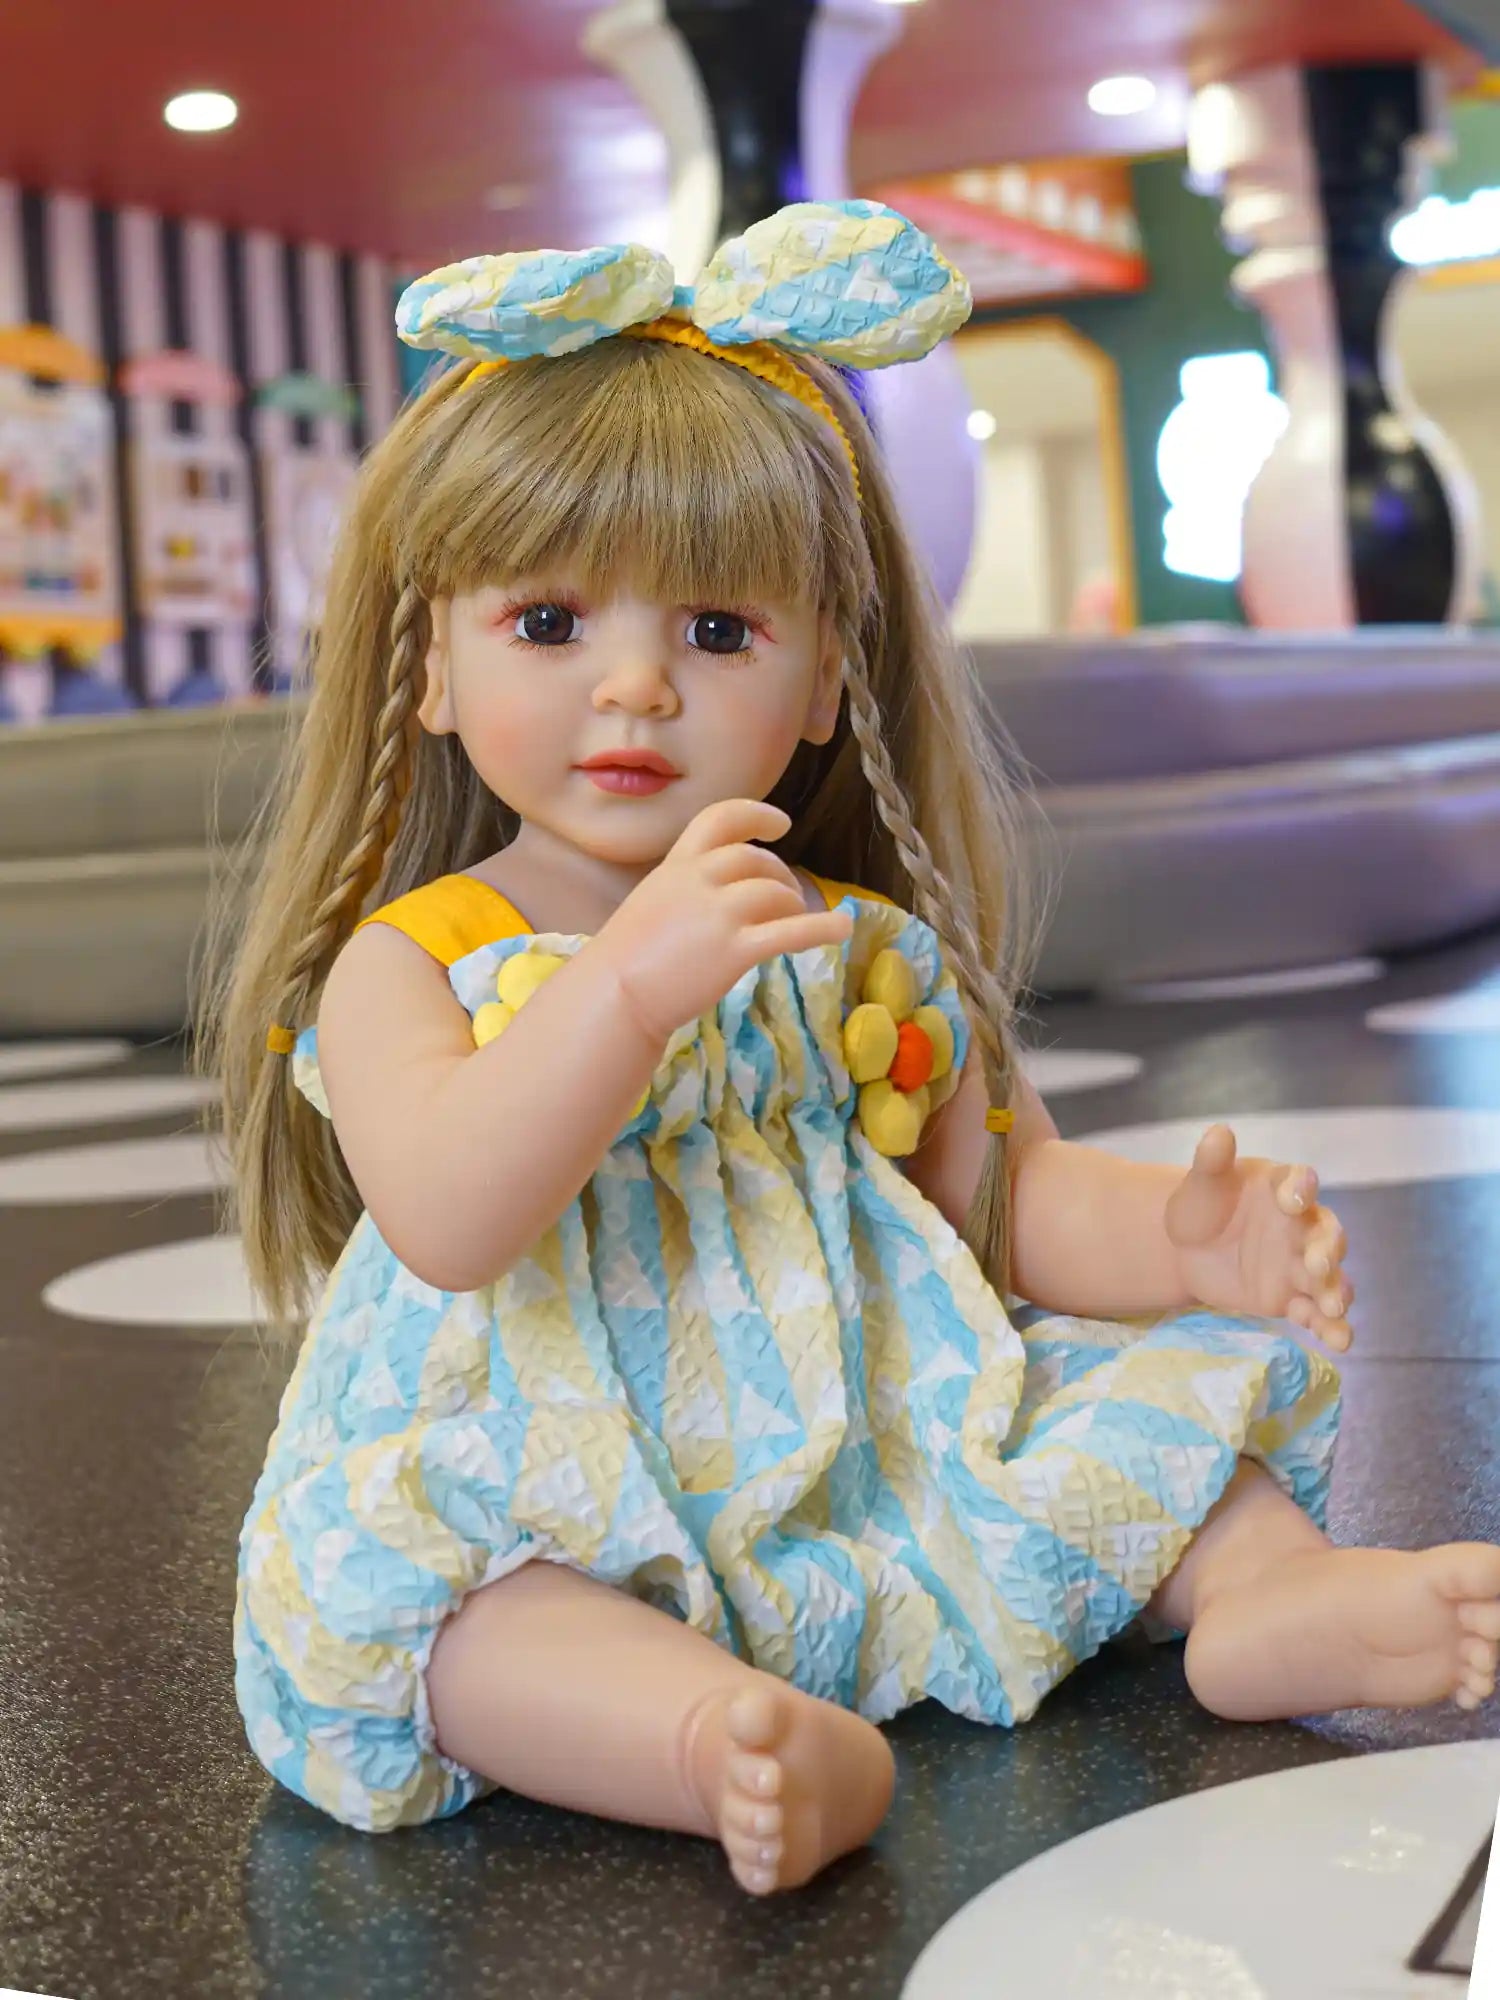 Realistic seated doll wearing a blue printed dress with yellow embellishments.